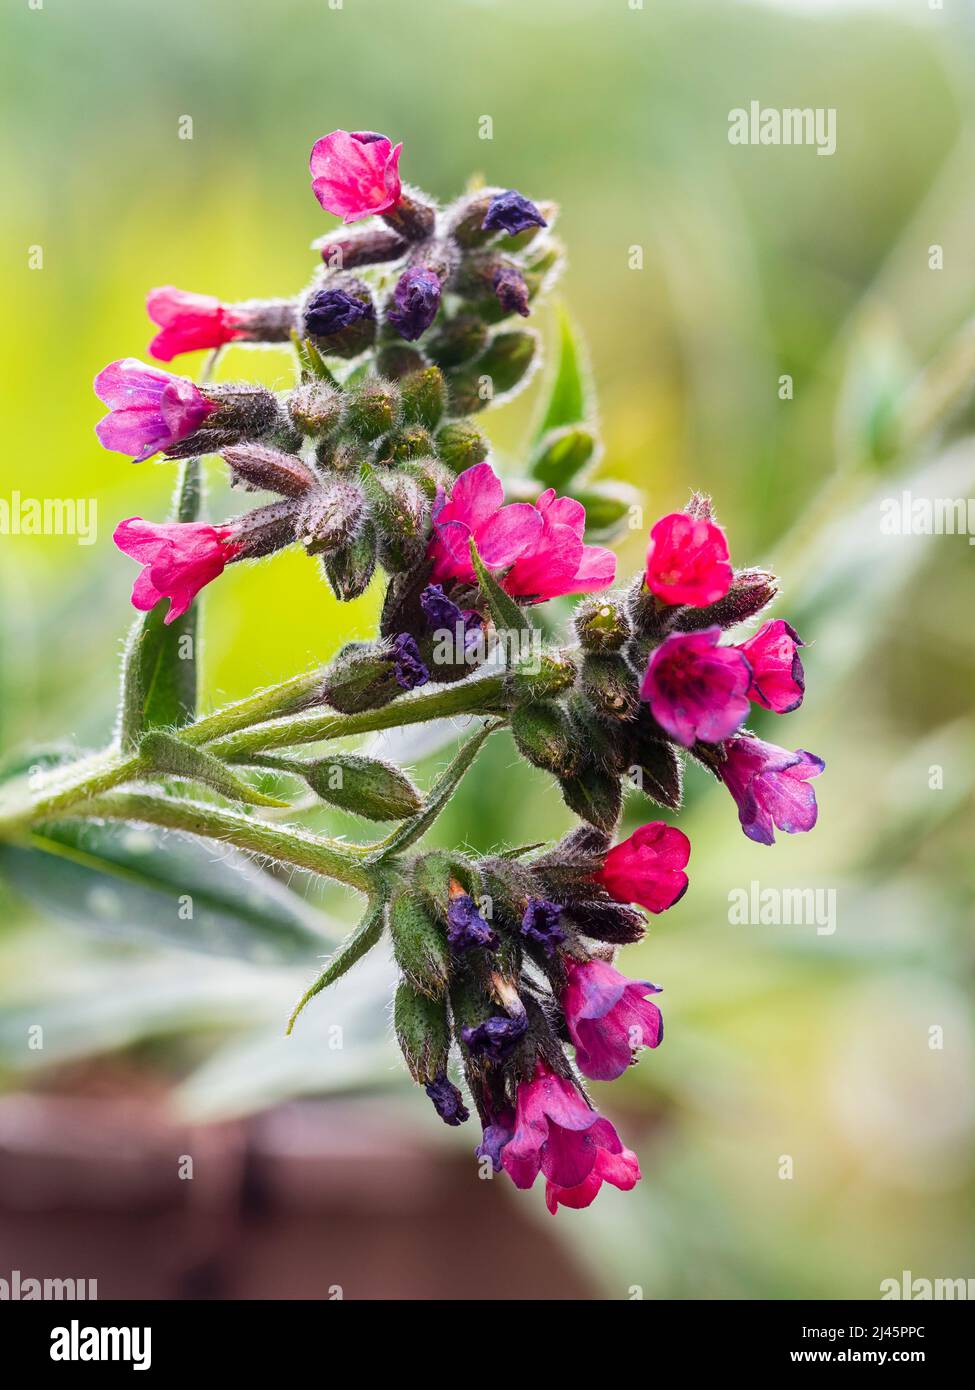 Red flowers and silver spotted leaves of the early spring flowering hardy lungwort, Pulmonaria saccharata 'Raspberry Splash' Stock Photo